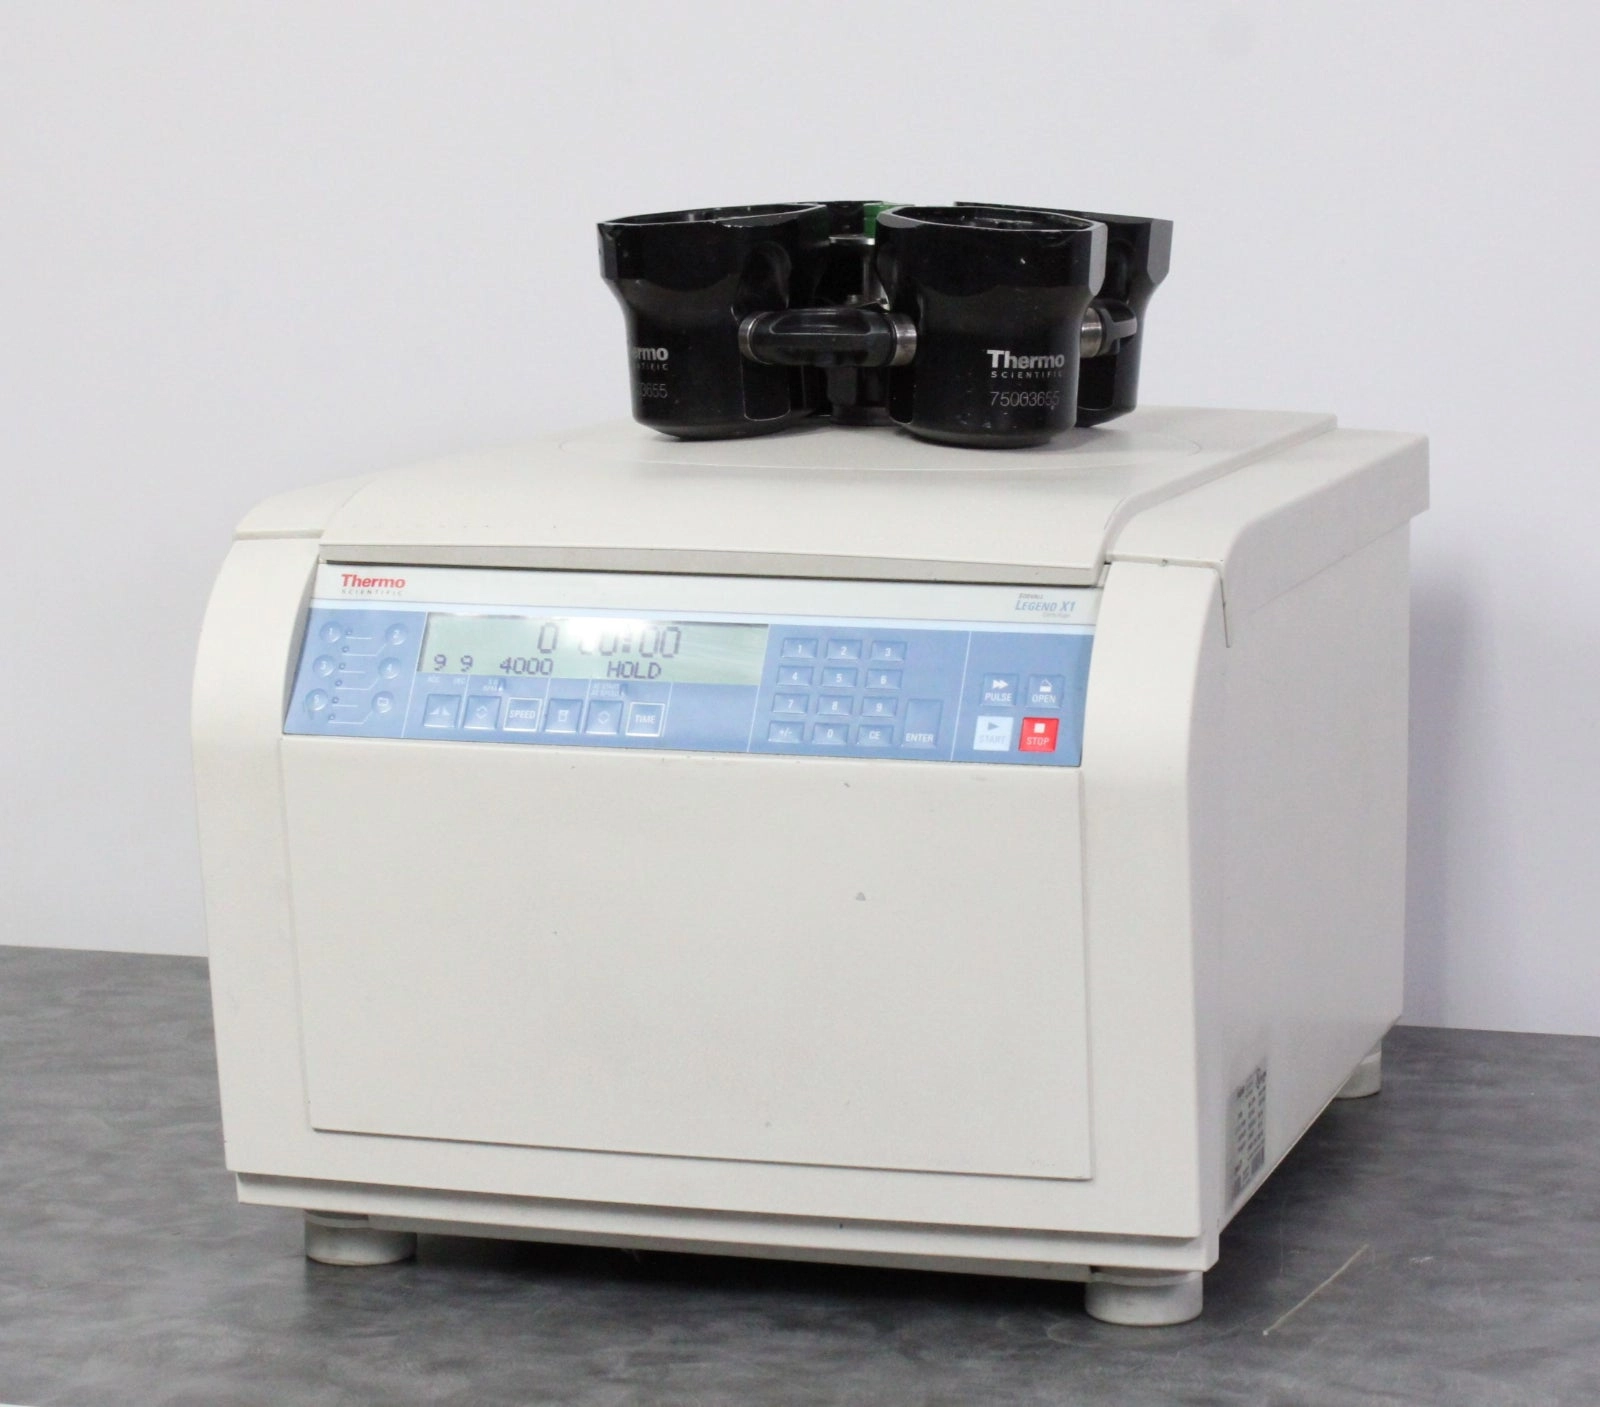 Thermo Sorvall Legend Multifuge X1 Benchtop Centrifuge &amp; 120-day Warranty